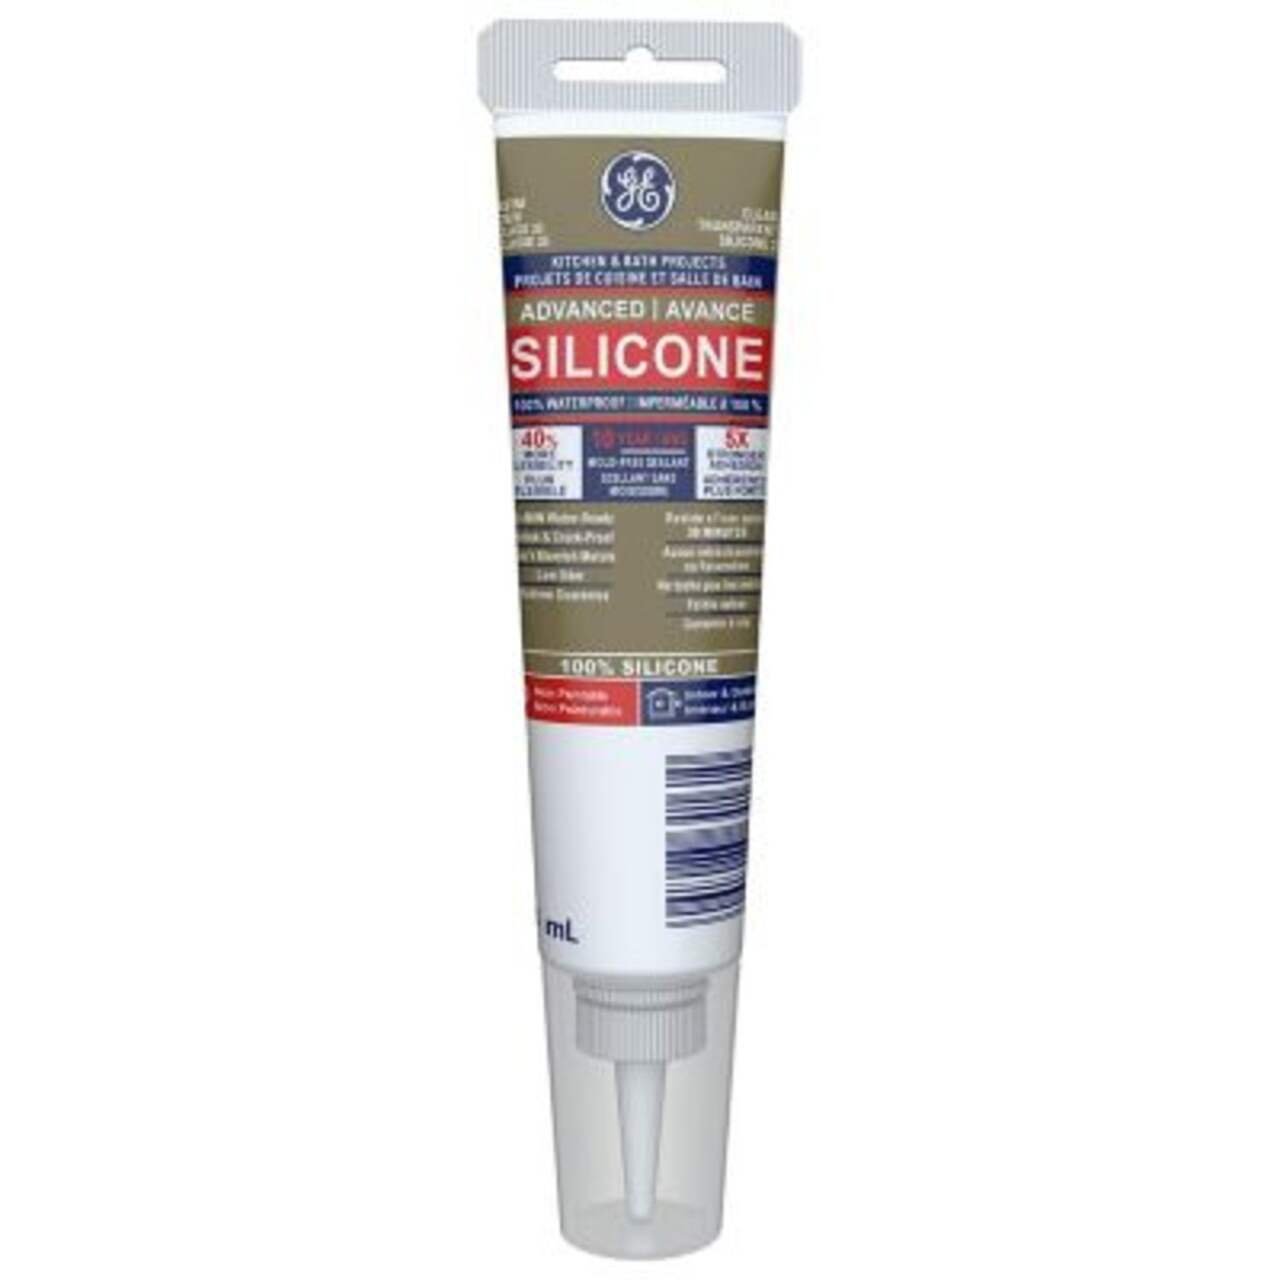 https://media-www.canadiantire.ca/product/fixing/paint/surface-prep-maintenance/0670854/ge-kitchen-bath-silicone-ii-clear-82-8ml-8d36fae1-29fc-4a9d-bf6d-30b22027590a-jpgrendition.jpg?imdensity=1&imwidth=640&impolicy=mZoom